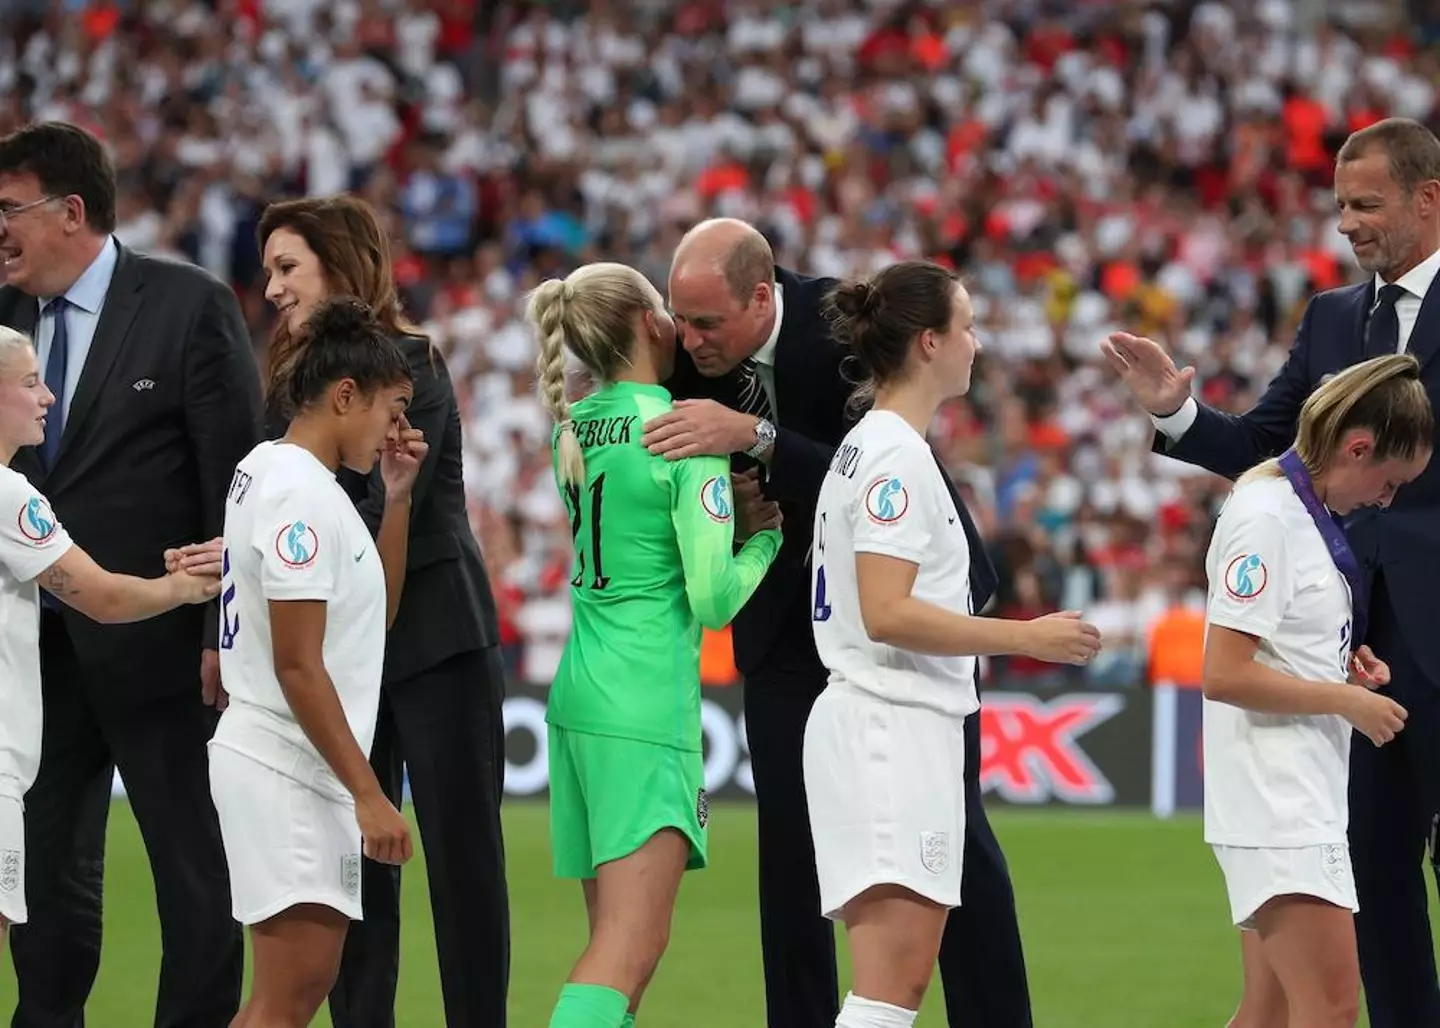 Prince William gave the Lionesses a hug after their historic win.